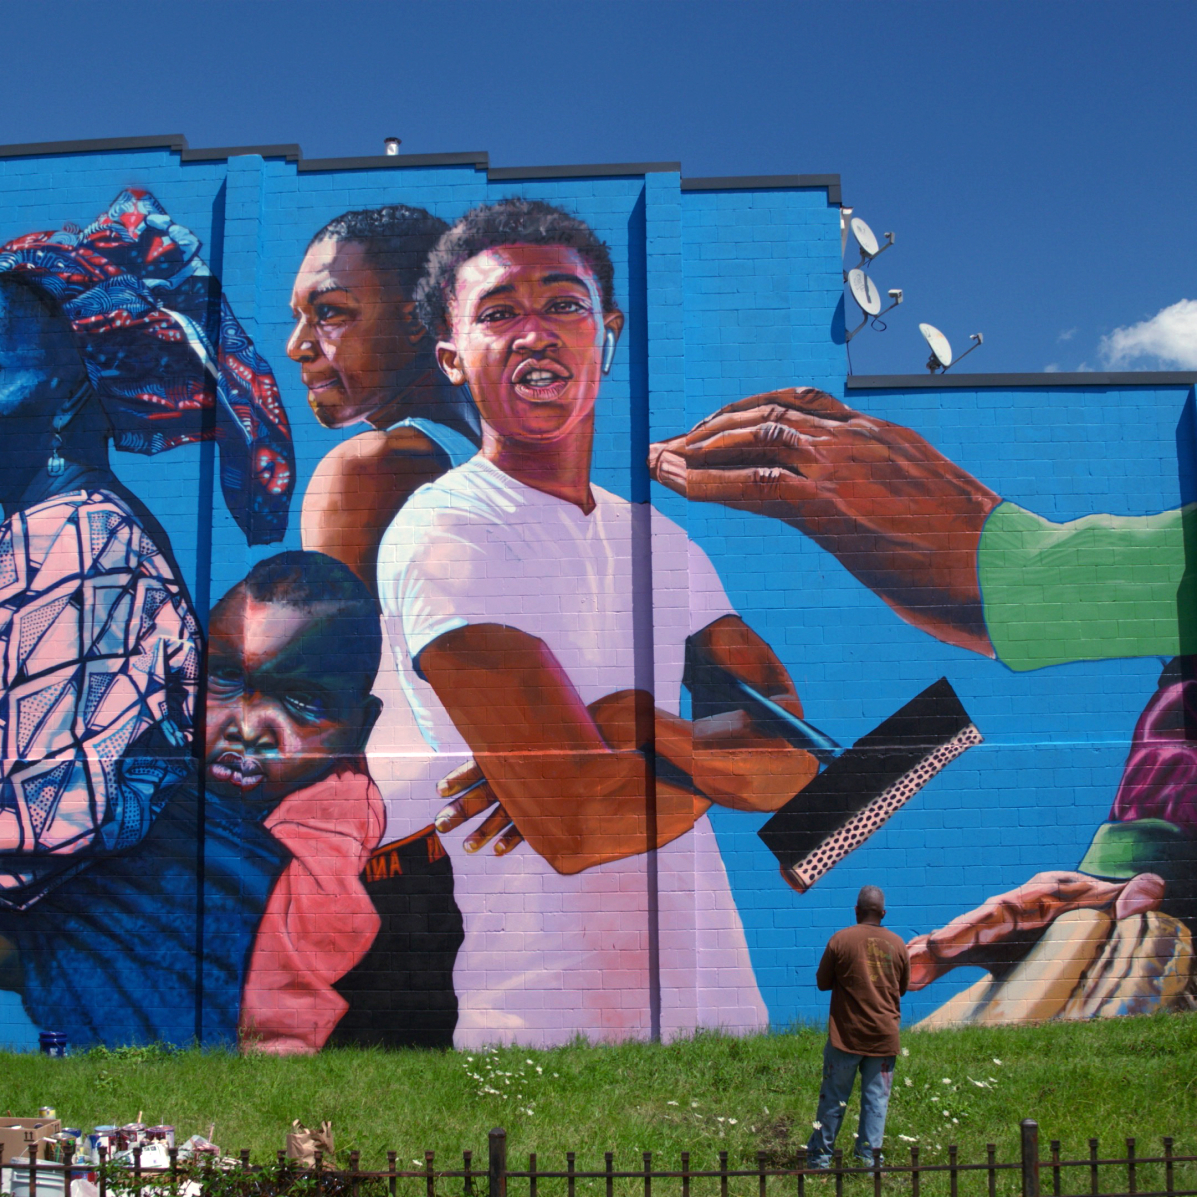 Part of the mural "African in America." Two Black women look to the left while two Black men look forward. The artist is standing in the grass looking at the mural.